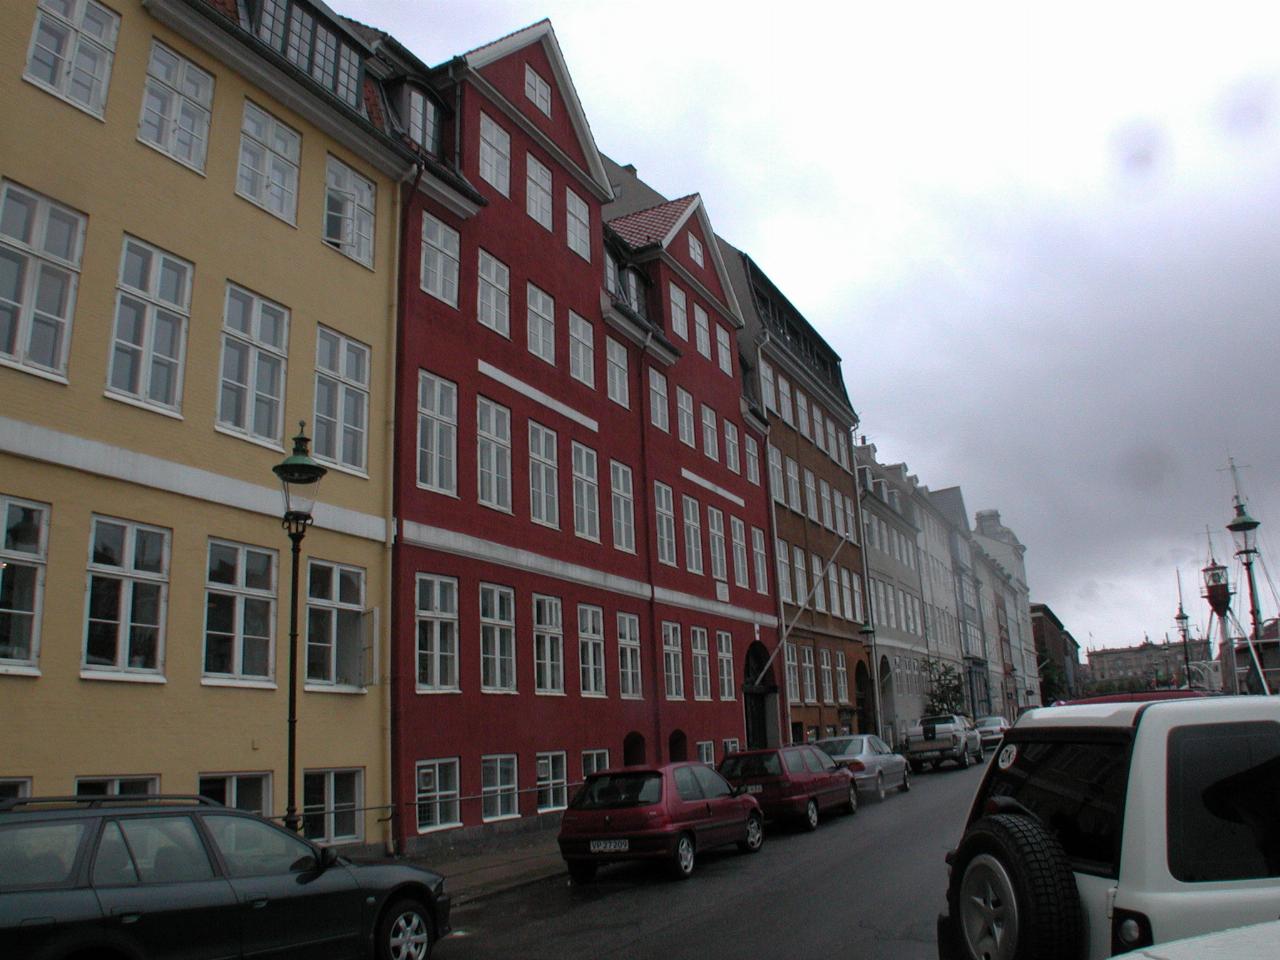 KPLU Viking Jazz: The home believed to have been occupied by Hans Christian Andersen on Nyhavn